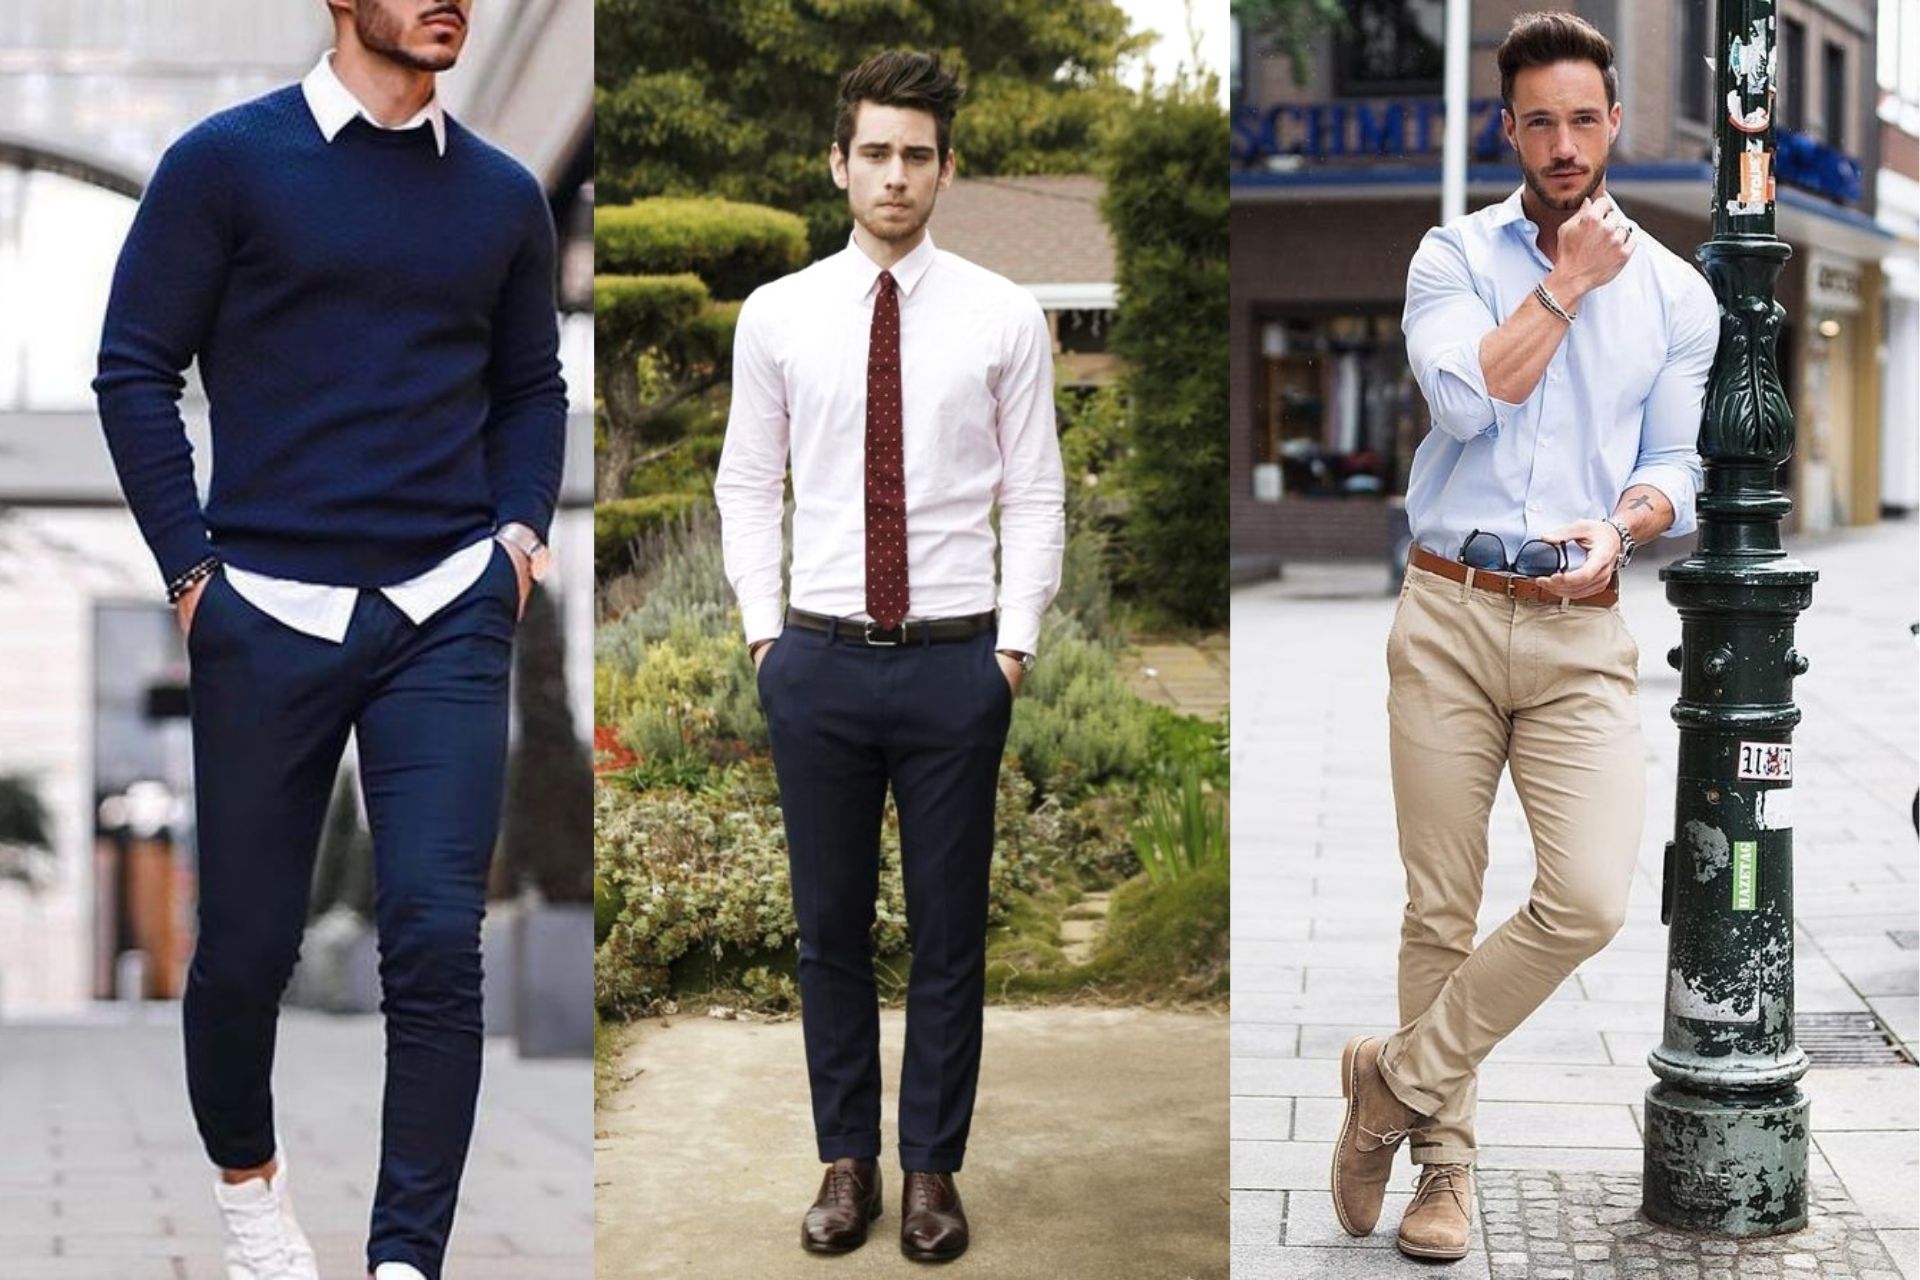 What To Wear To An Interview Teenager? 